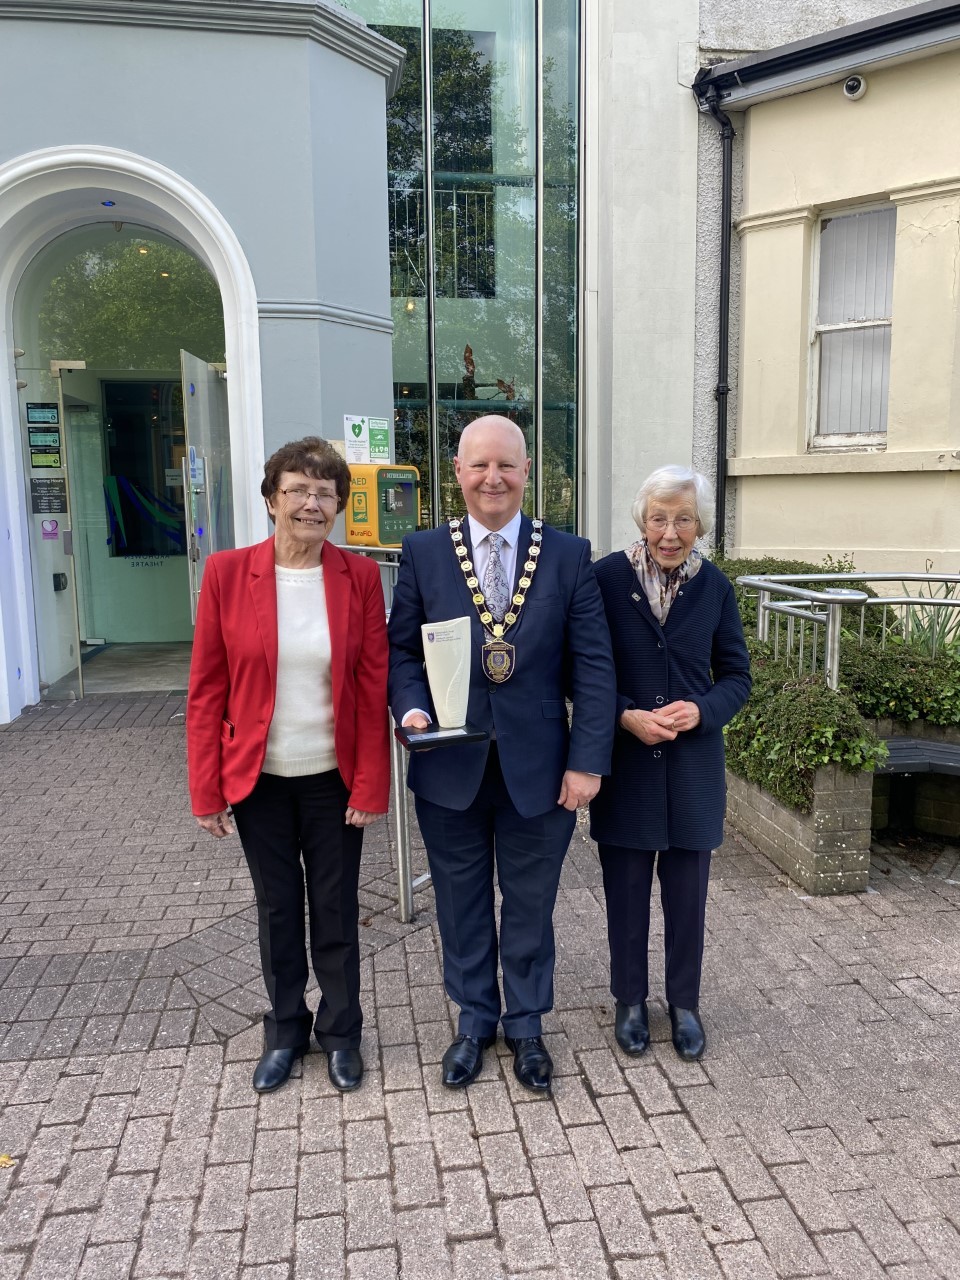 Feis stalwarts pictured with the Chair of the Fermanagh and Omagh District Council. Pictured from left to right: Noreen McCluskey, Councillor Erroll Thompson and Feis President Lena Corrigan.